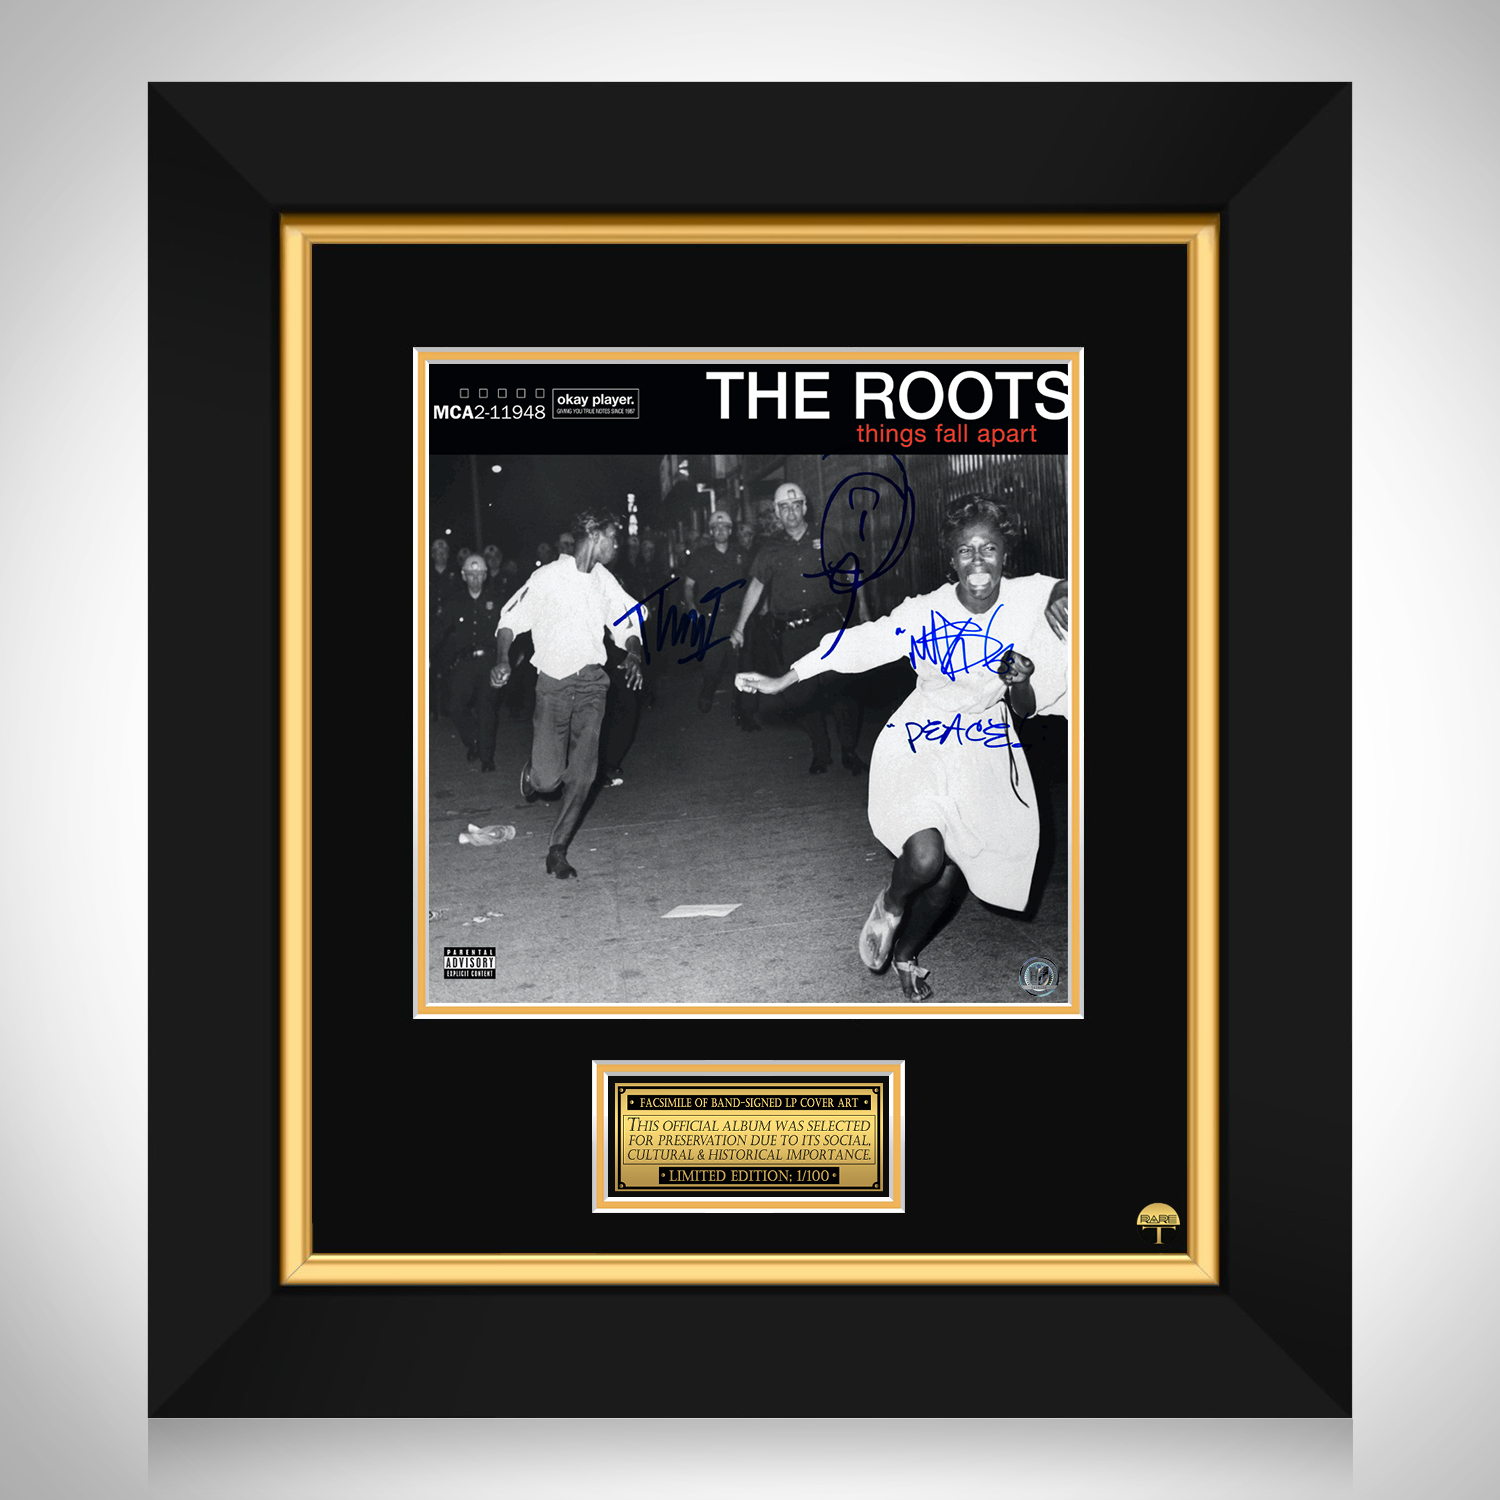 The Roots - Things Fall Apart LP Cover Limited Signature Edition 